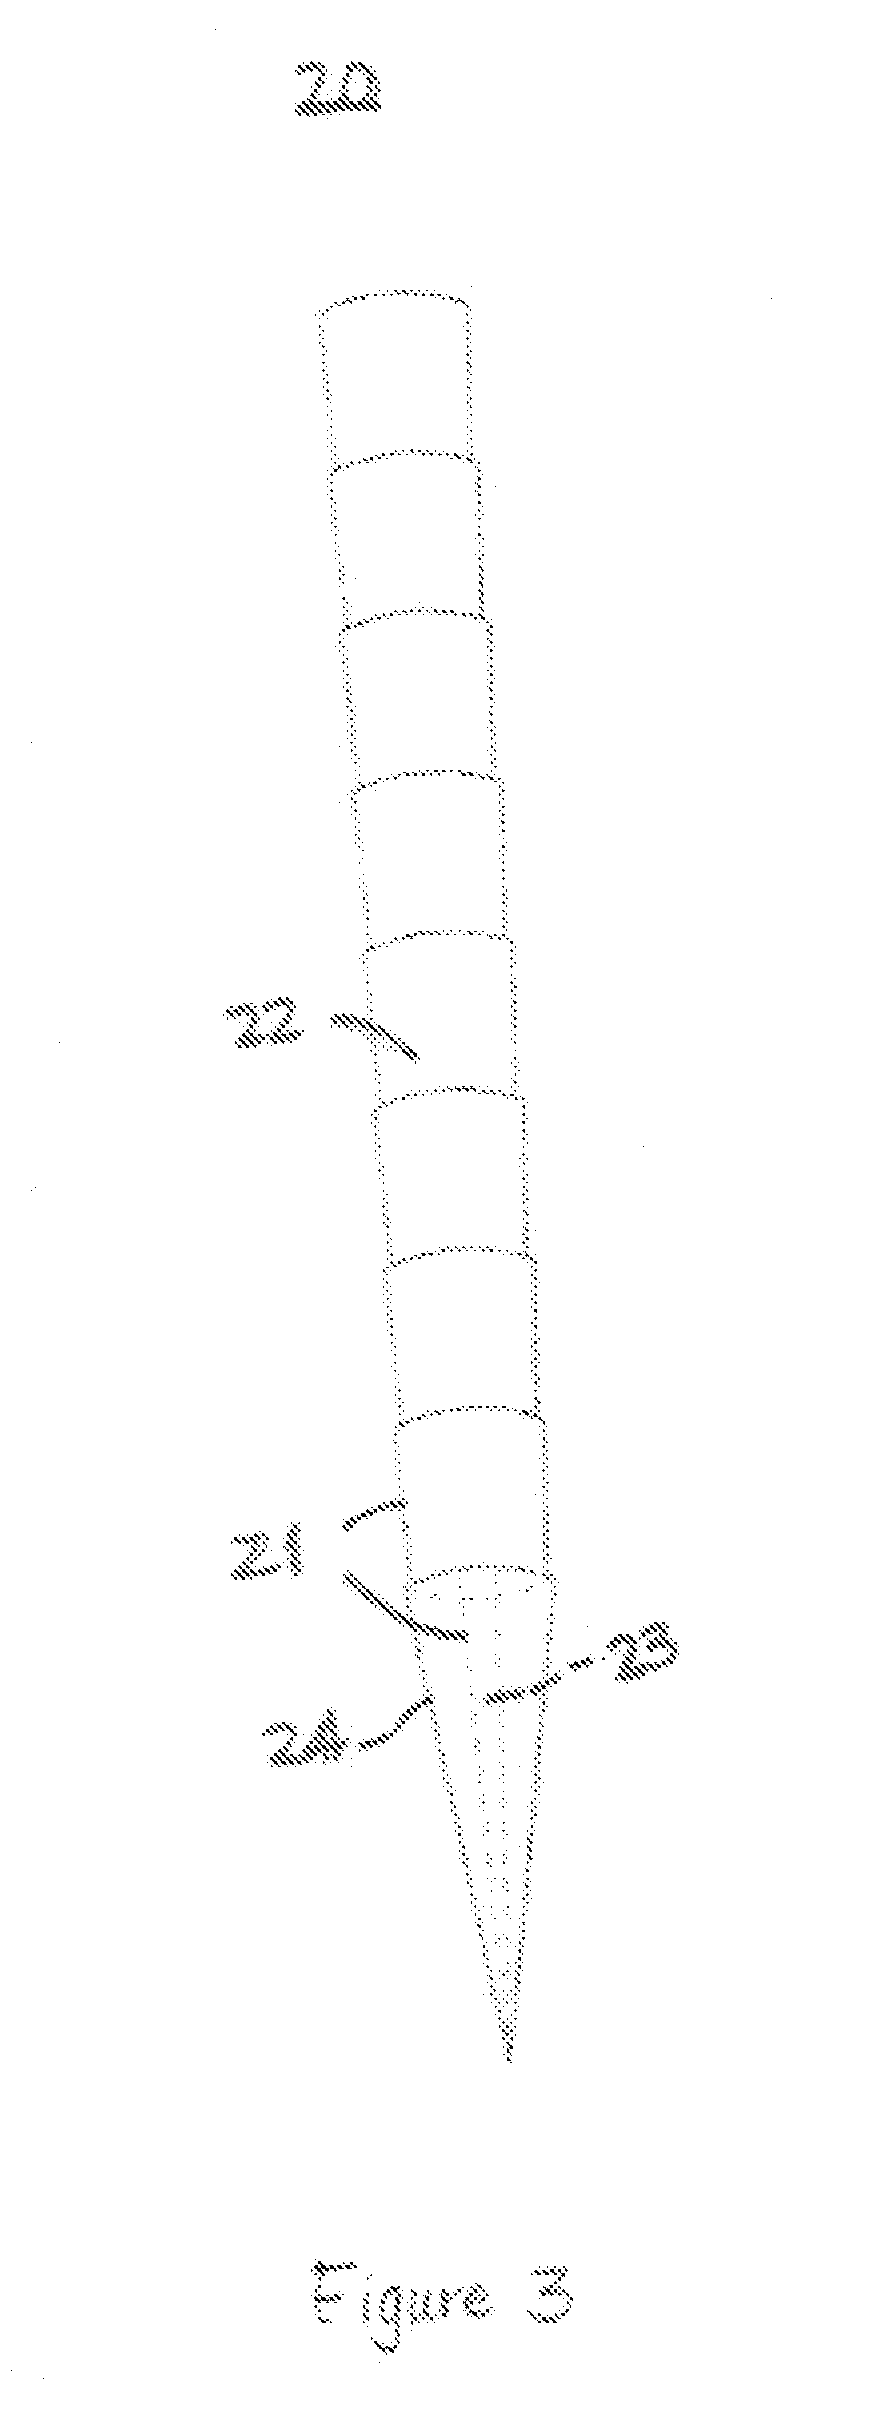 Dental Material and Methods of Use